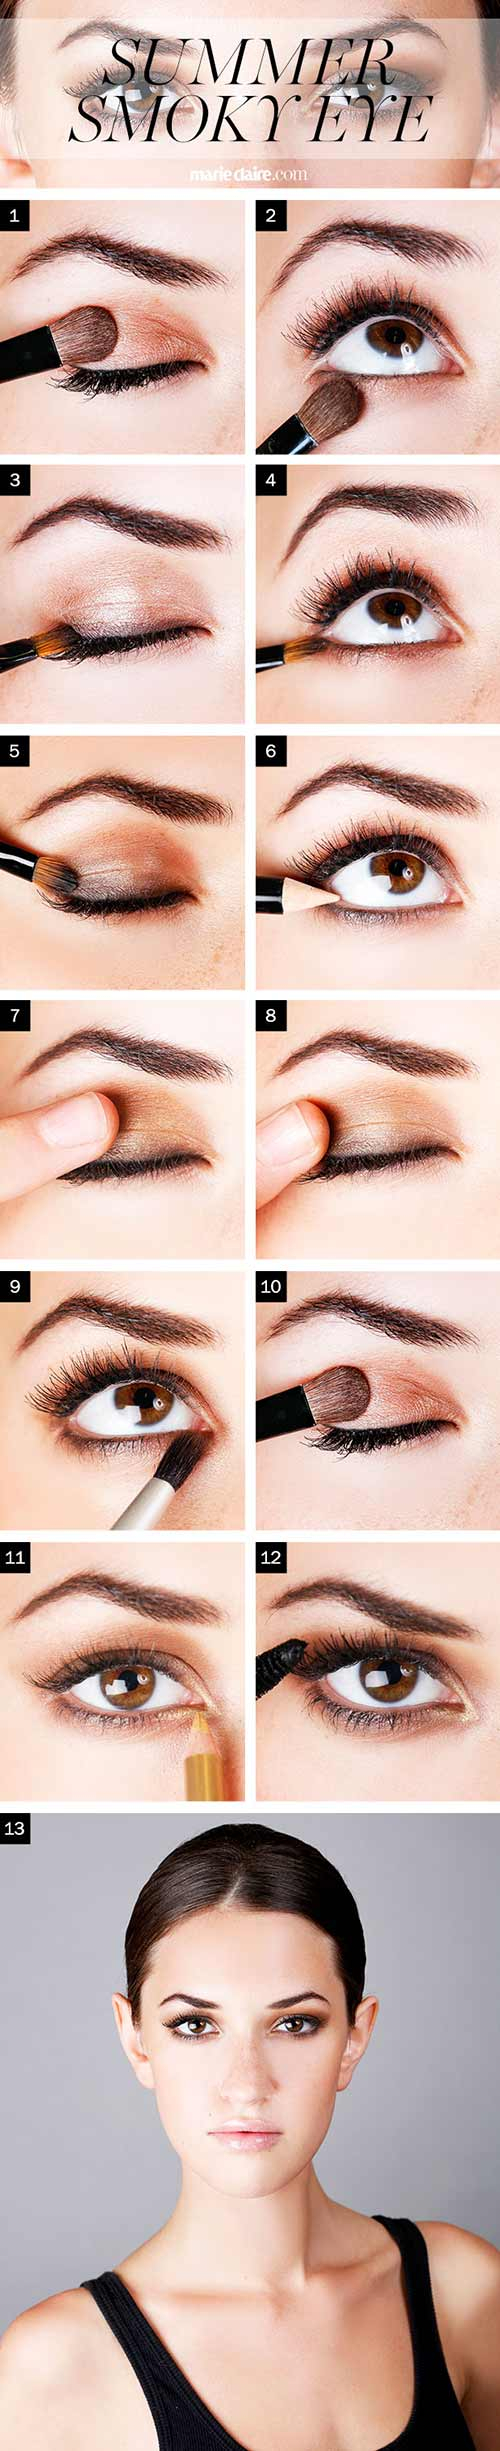 Pale Pink Eye Makeup How To Do Smokey Eye Makeup Top 10 Tutorial Pictures For 2019